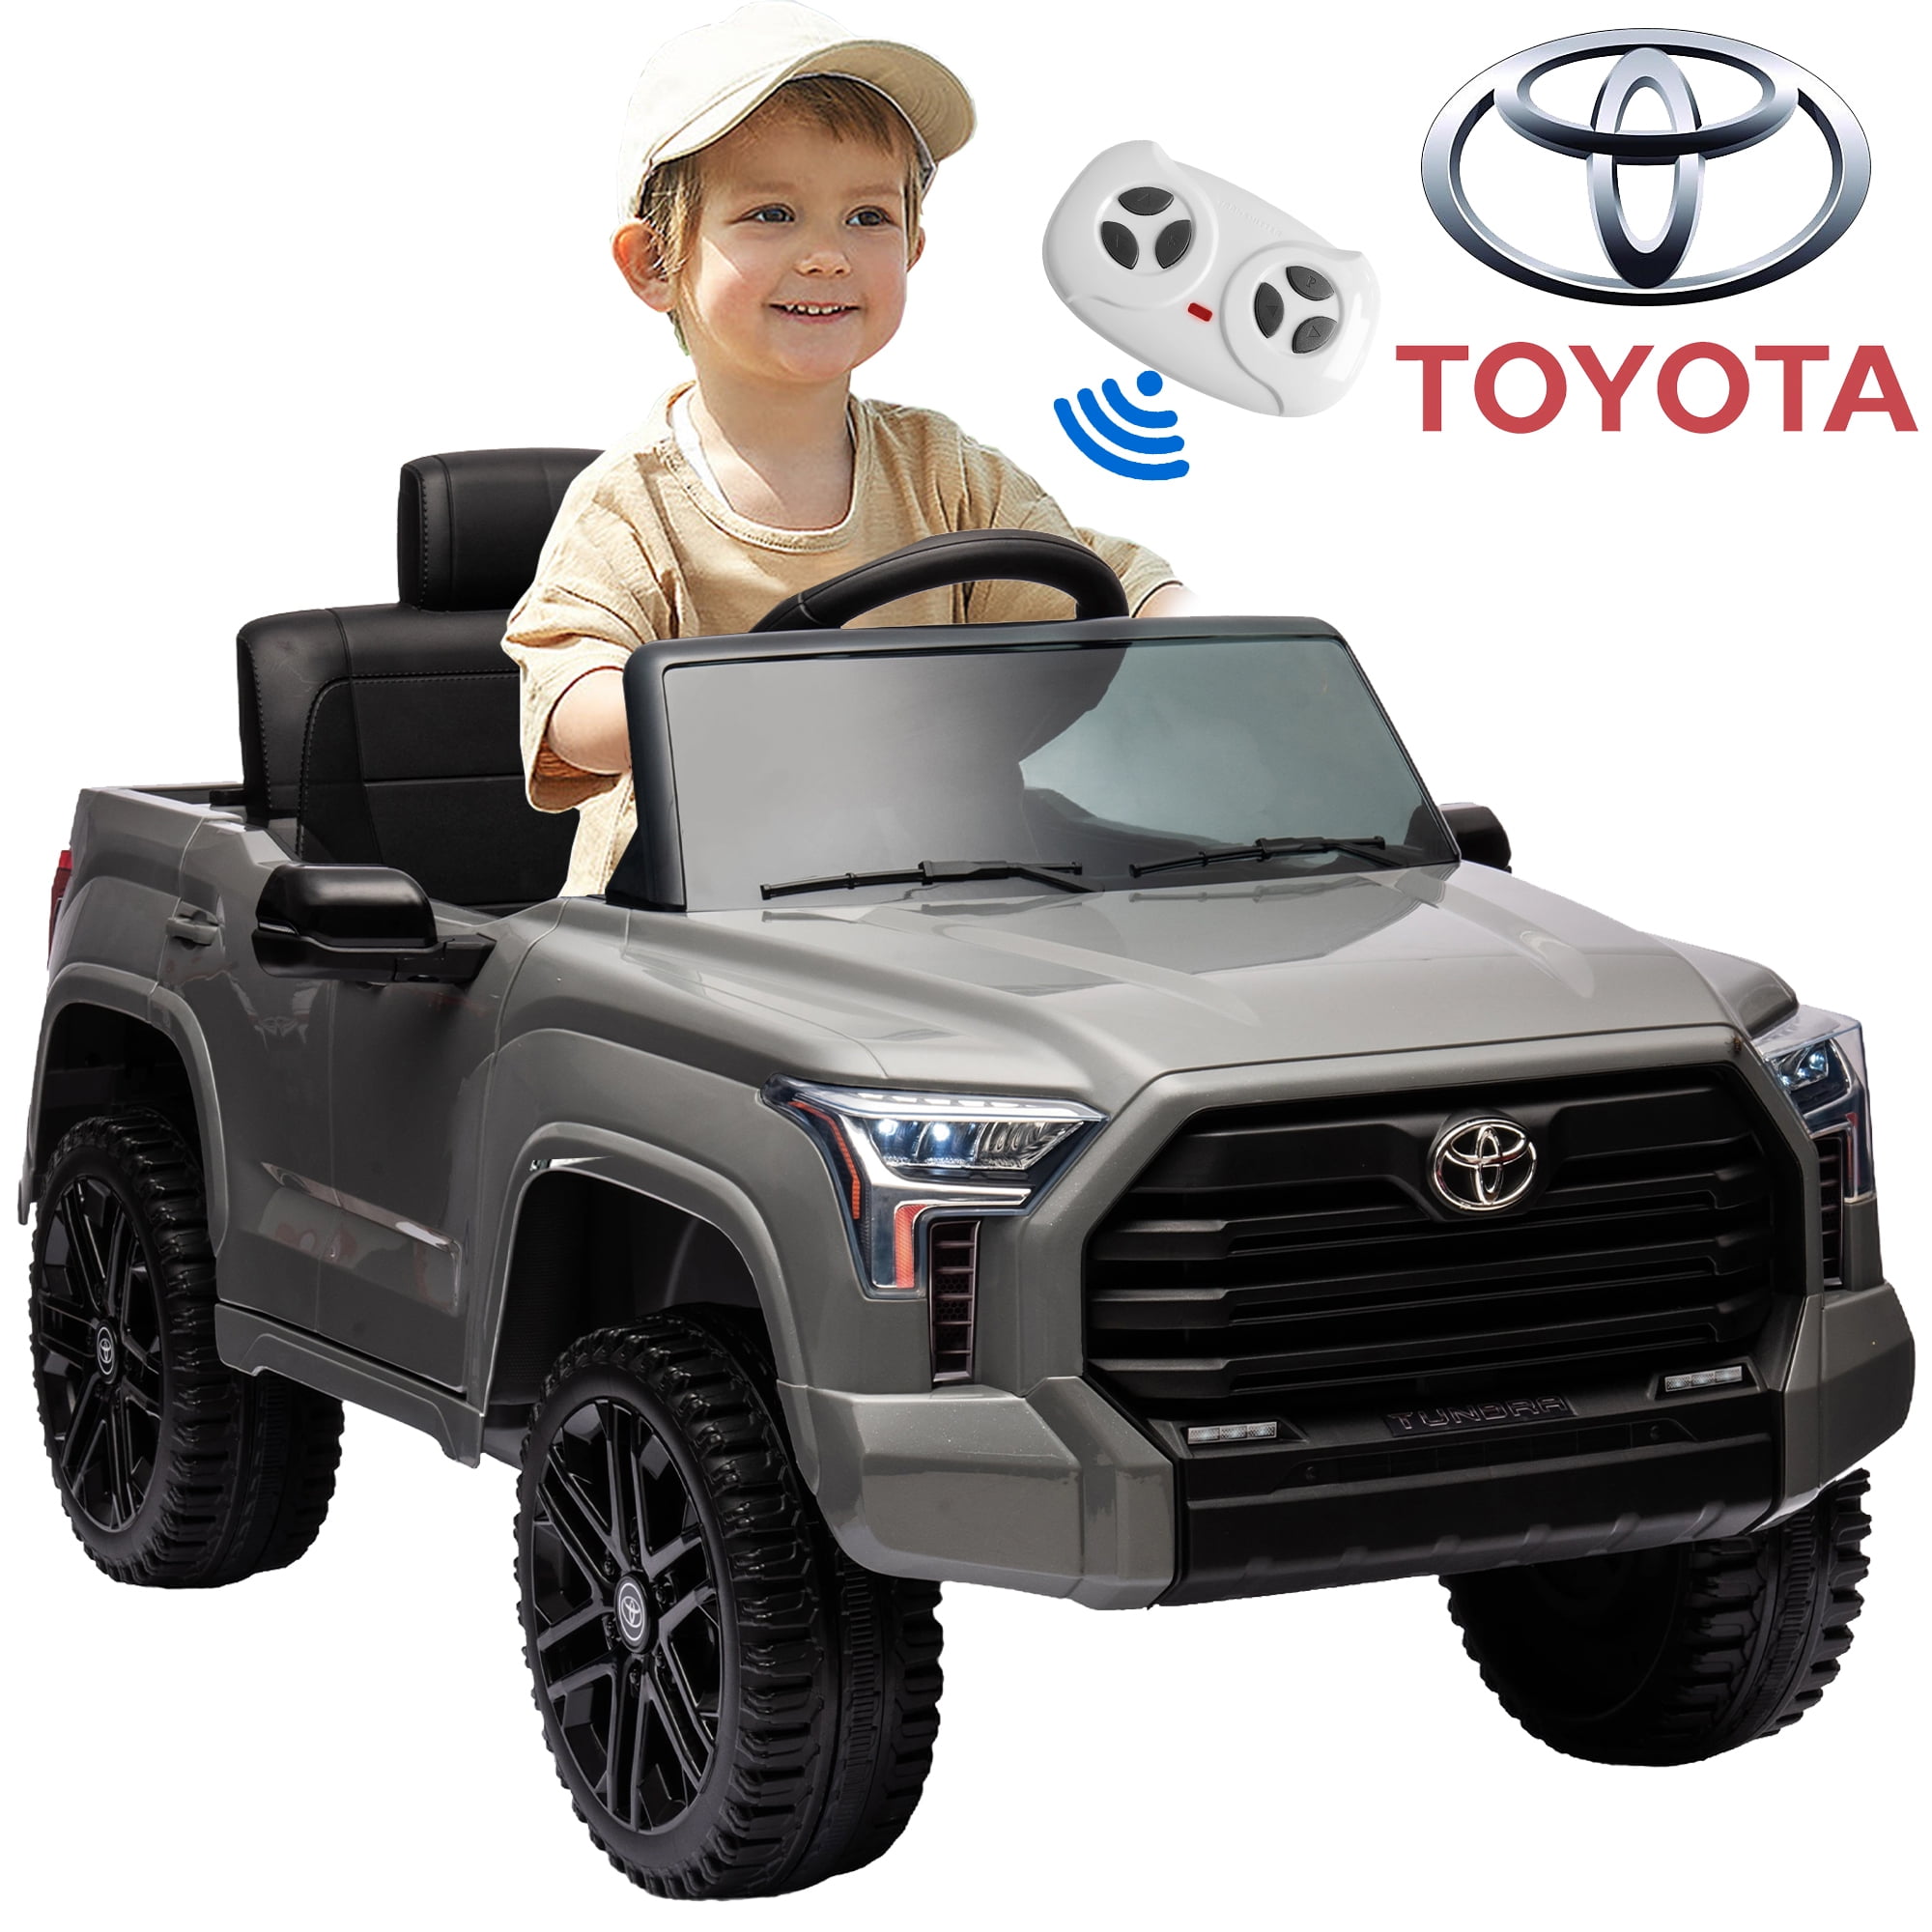 Toyota Tundra Ride On Cars for Kids, 12V Licensed Toyota Tundra Powered ...